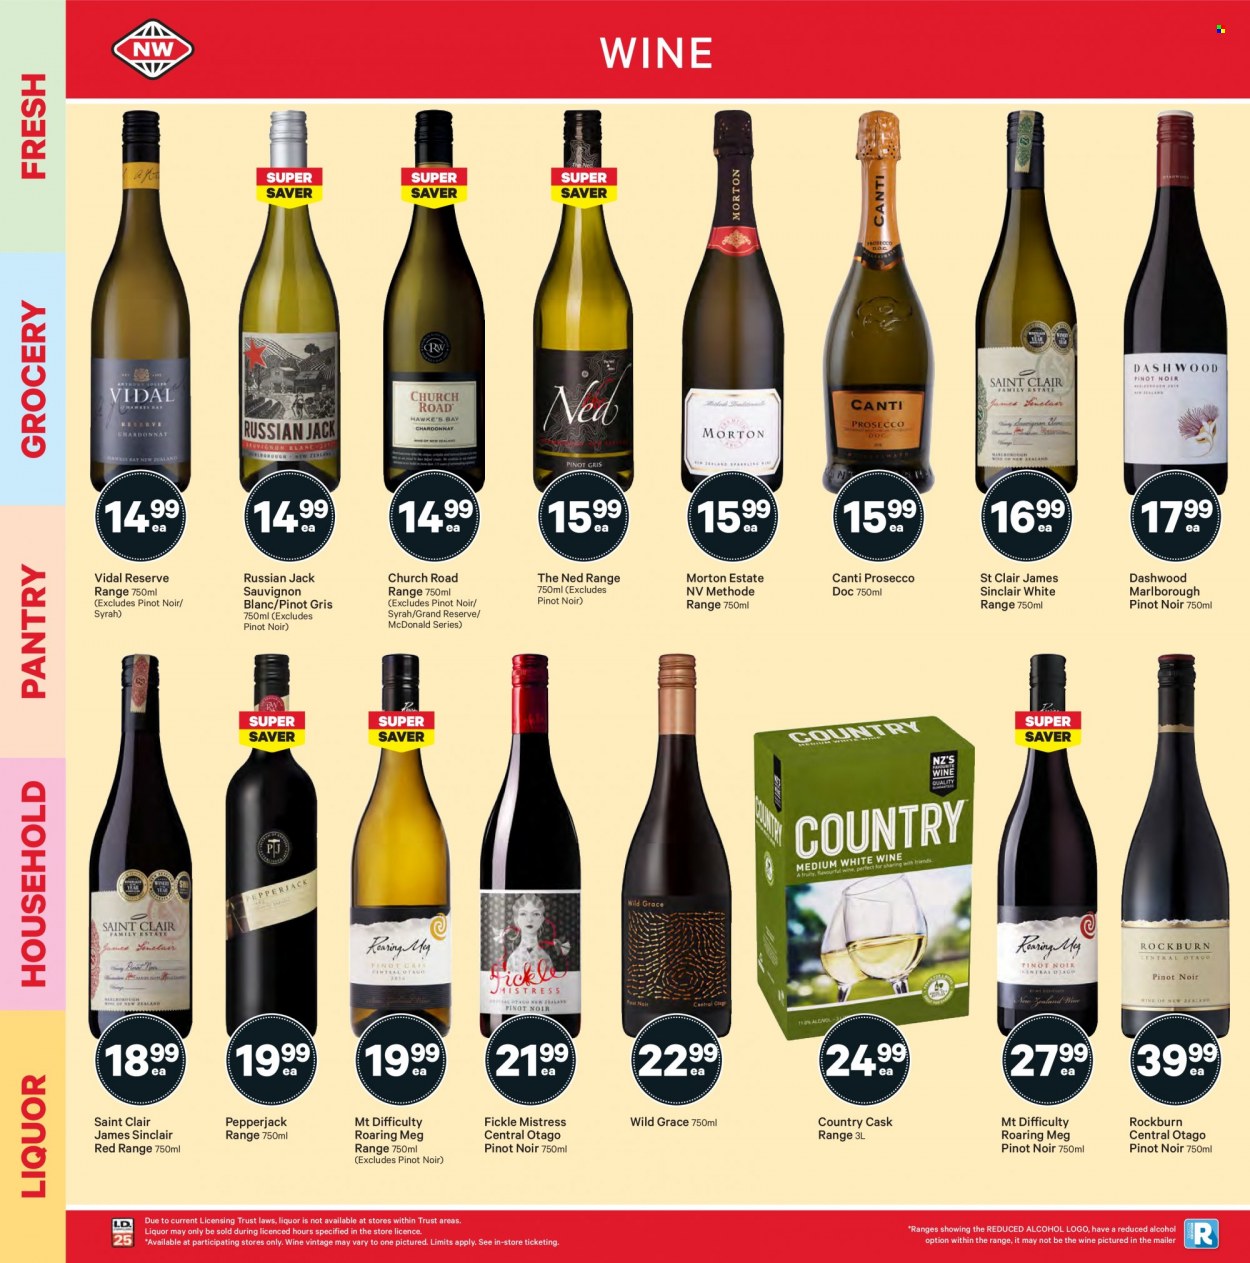 thumbnail - New World mailer - 13.09.2021 - 19.09.2021 - Sales products - Pepper Jack cheese, red wine, white wine, prosecco, wine, Pinot Noir, alcohol, Syrah, Pinot Grigio, Sauvignon Blanc, Trust. Page 28.